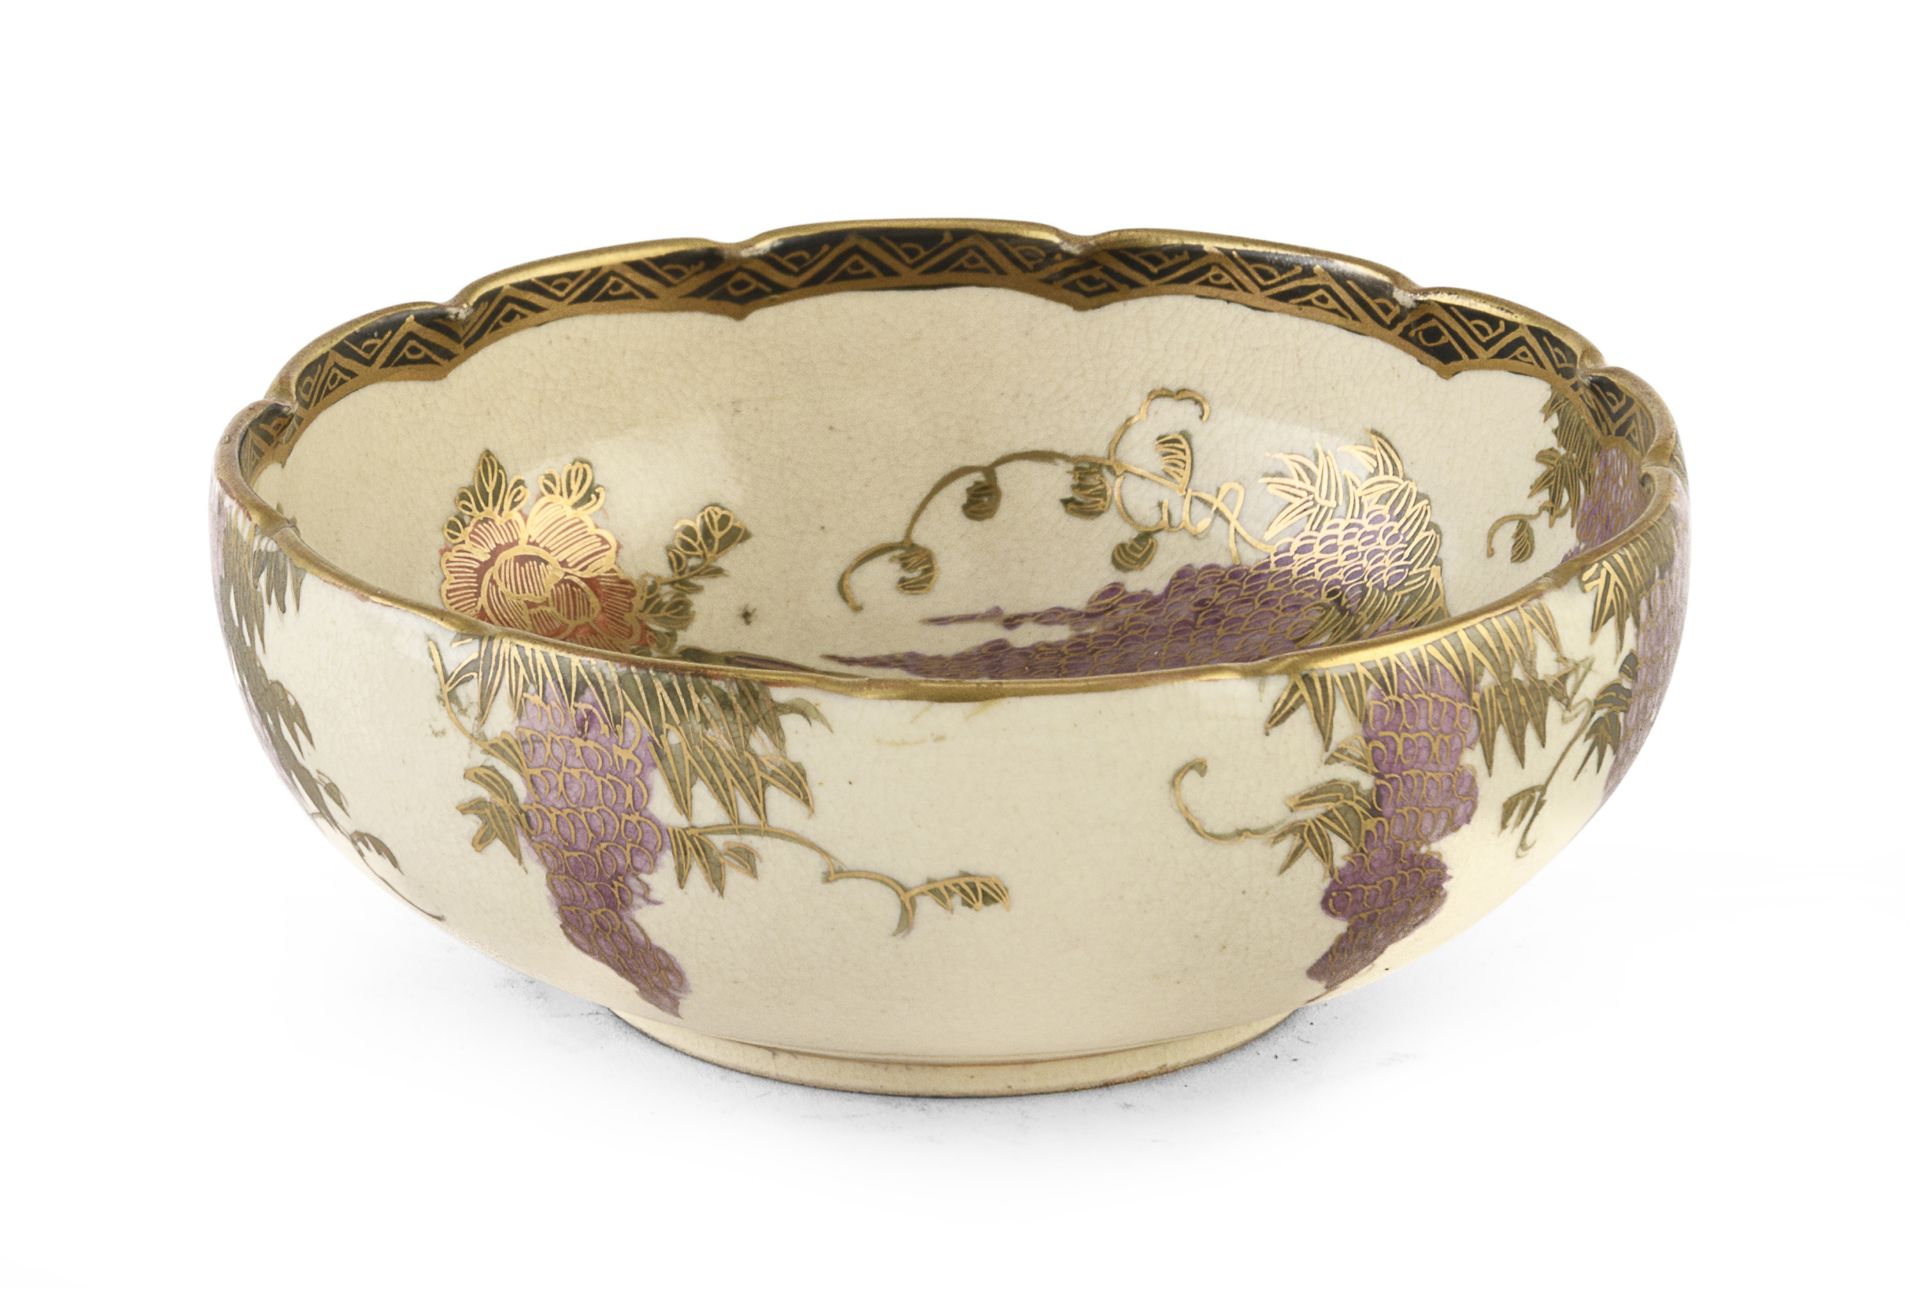 A SMALL JAPANESE POLYCHROME AND GOLD ENAMELED SATSUMA CERAMIC BOWL LATE 19TH EARLY 20TH CENTURY. - Bild 2 aus 2